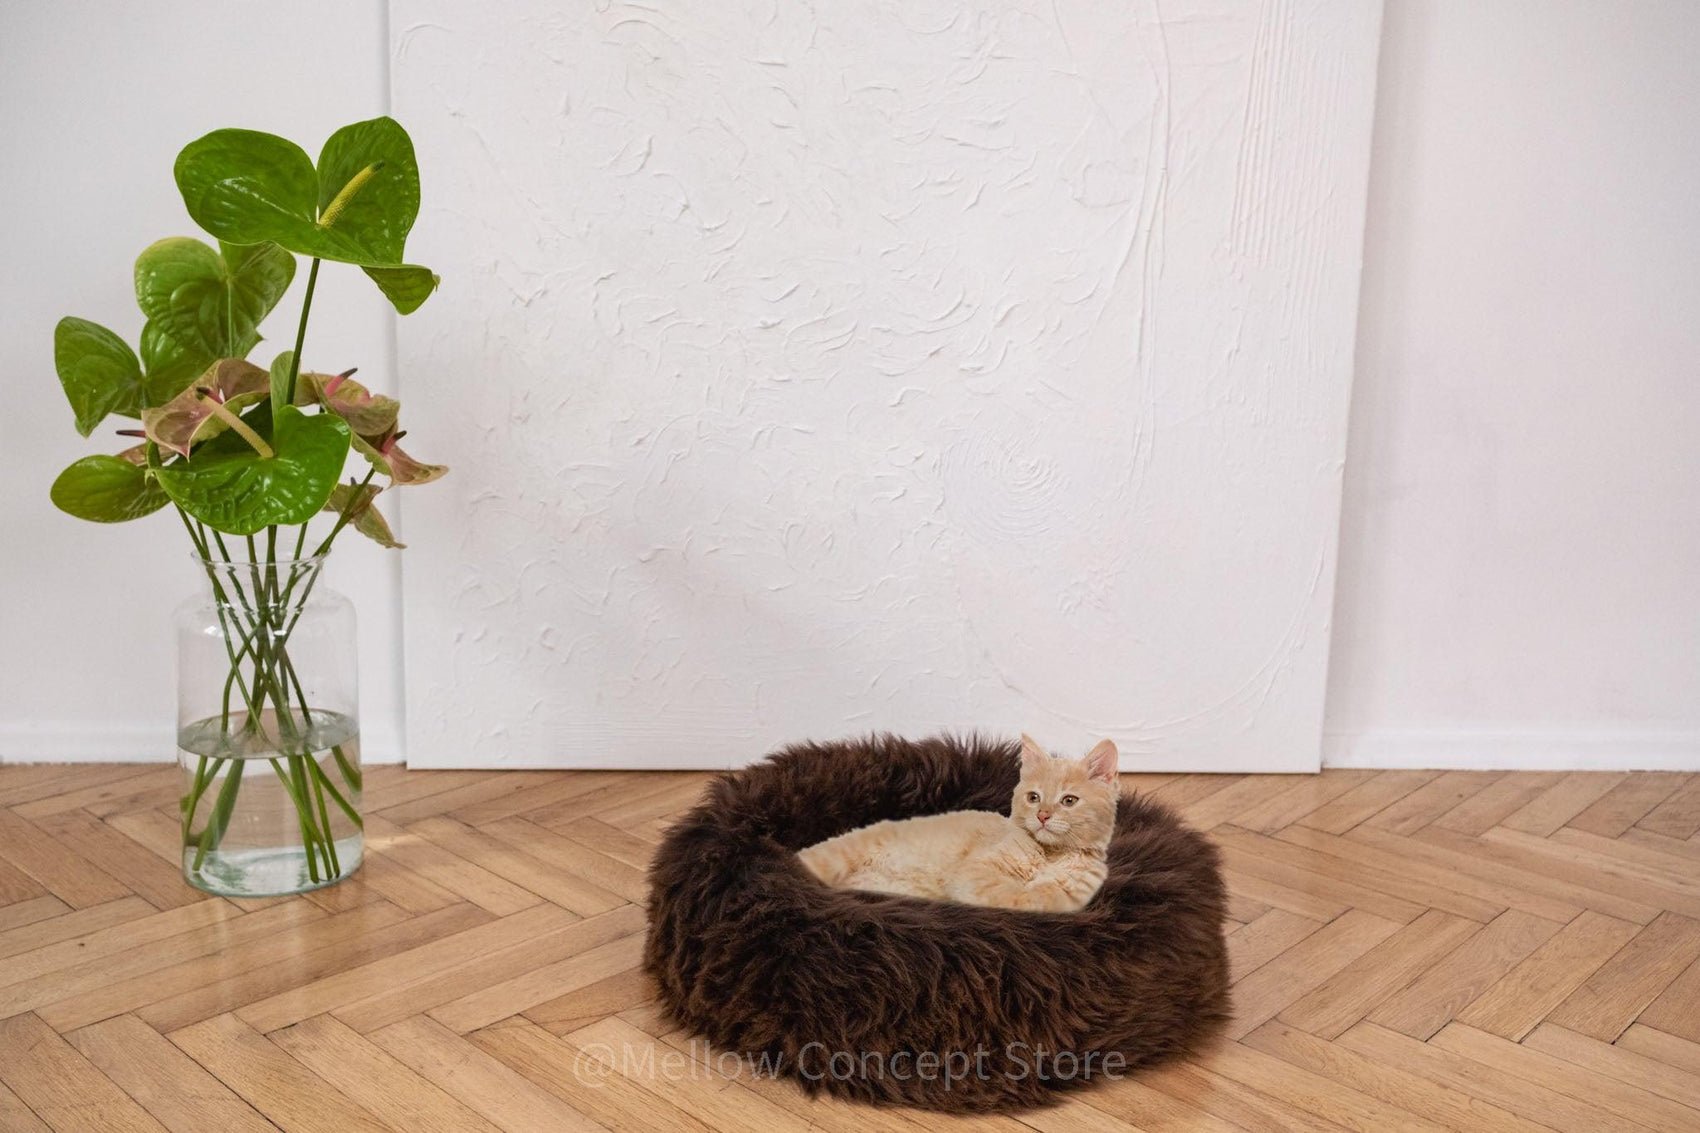 A cat is lounging on a Round Natural Sheepskin Pet Bed - Brown from Mellow Pet Store next to a plant.